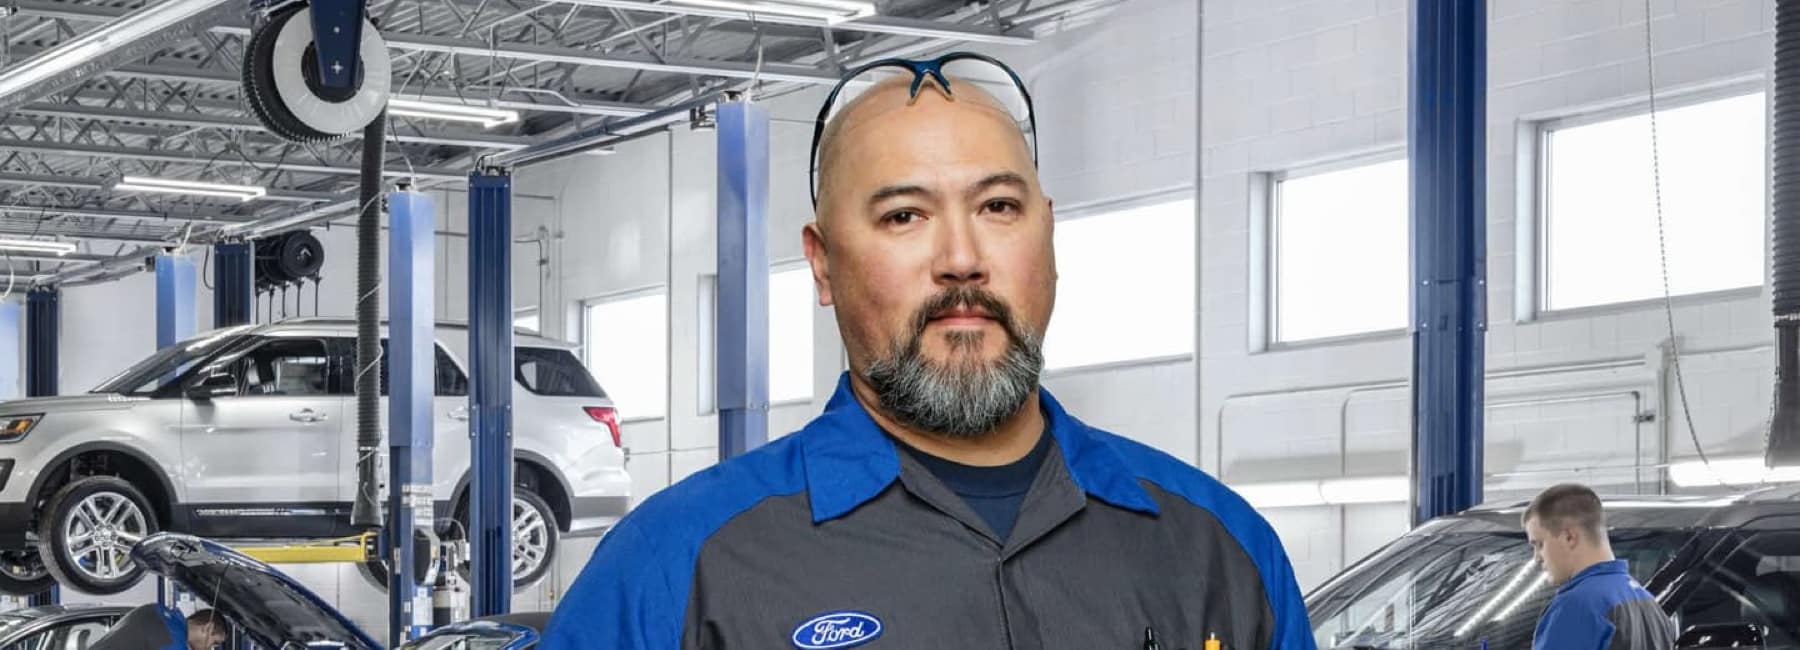 Ford-service-technicians-in-service-bay